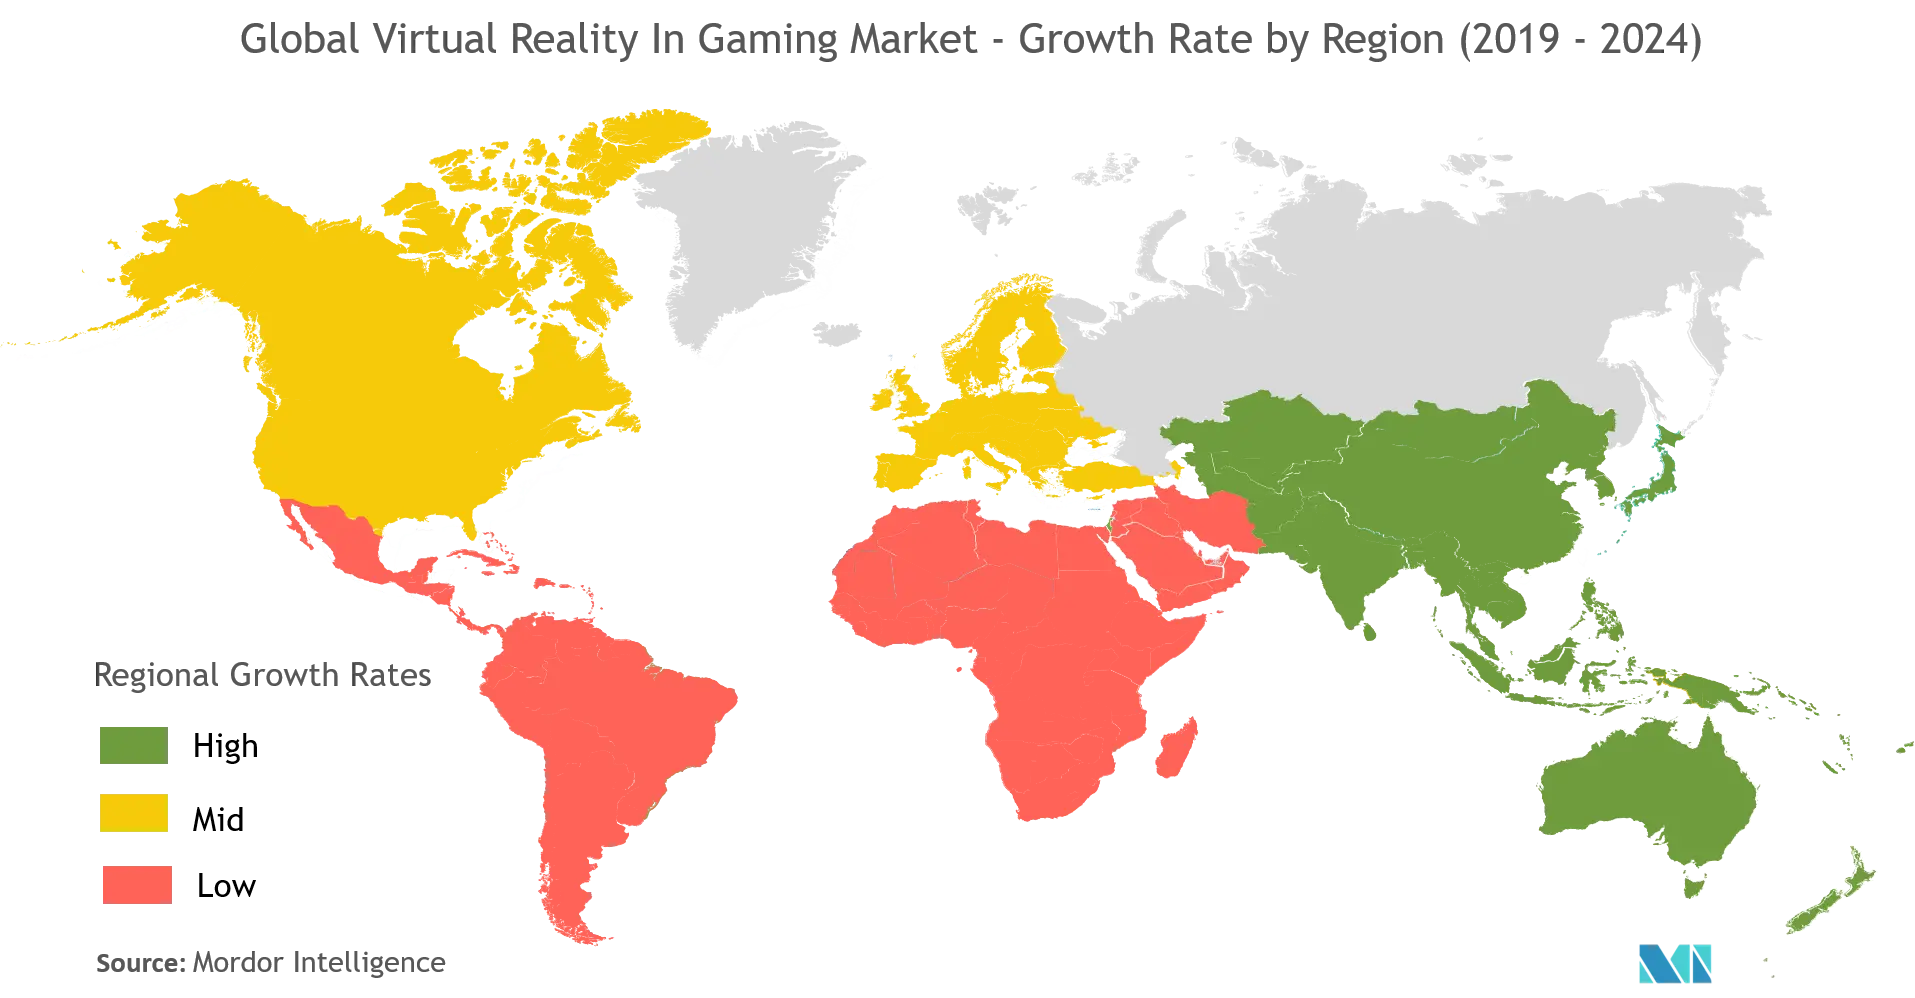 Virtual Reality in Gaming Market Growth Rate By Region